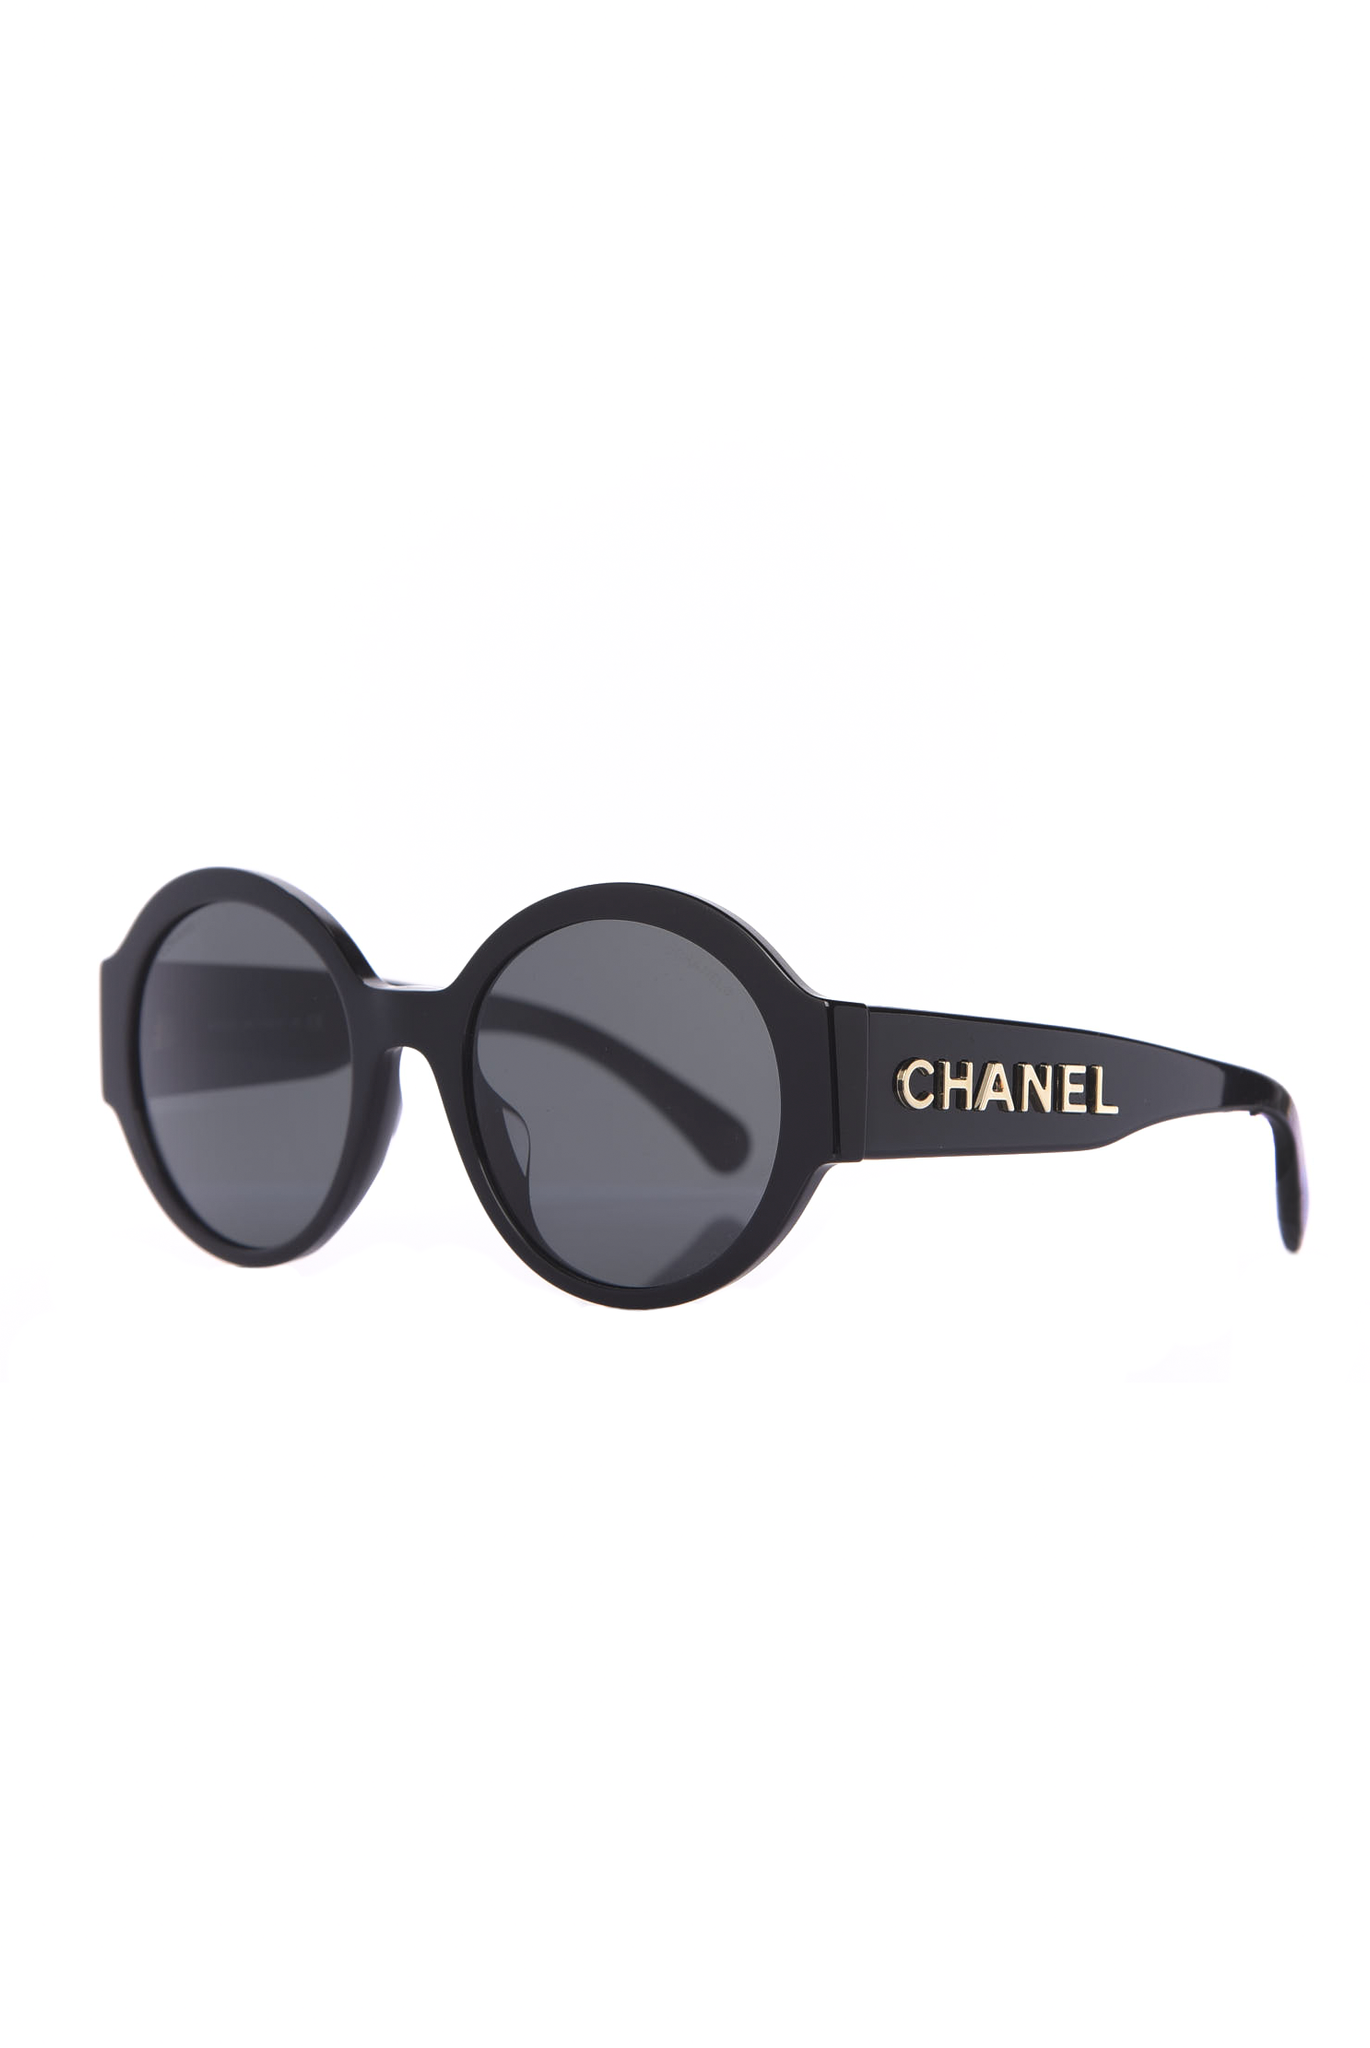 Sunglasses CHANEL (1 988 625 LBP) ❤ liked on Polyvore featuring  accessories, eyewear, sunglasses, logo len…